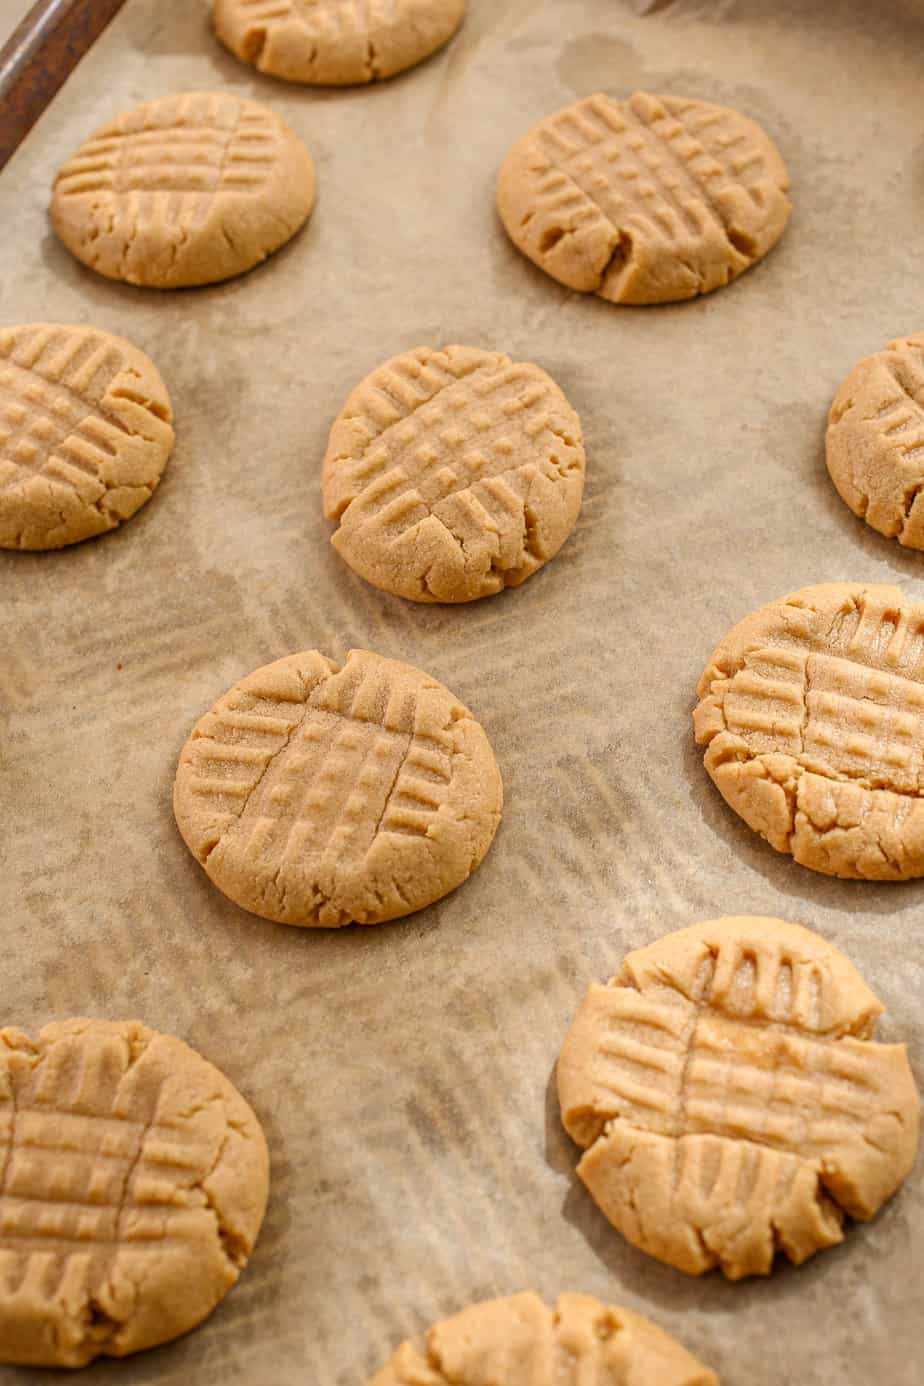 The best peanut butter cookies after baking.